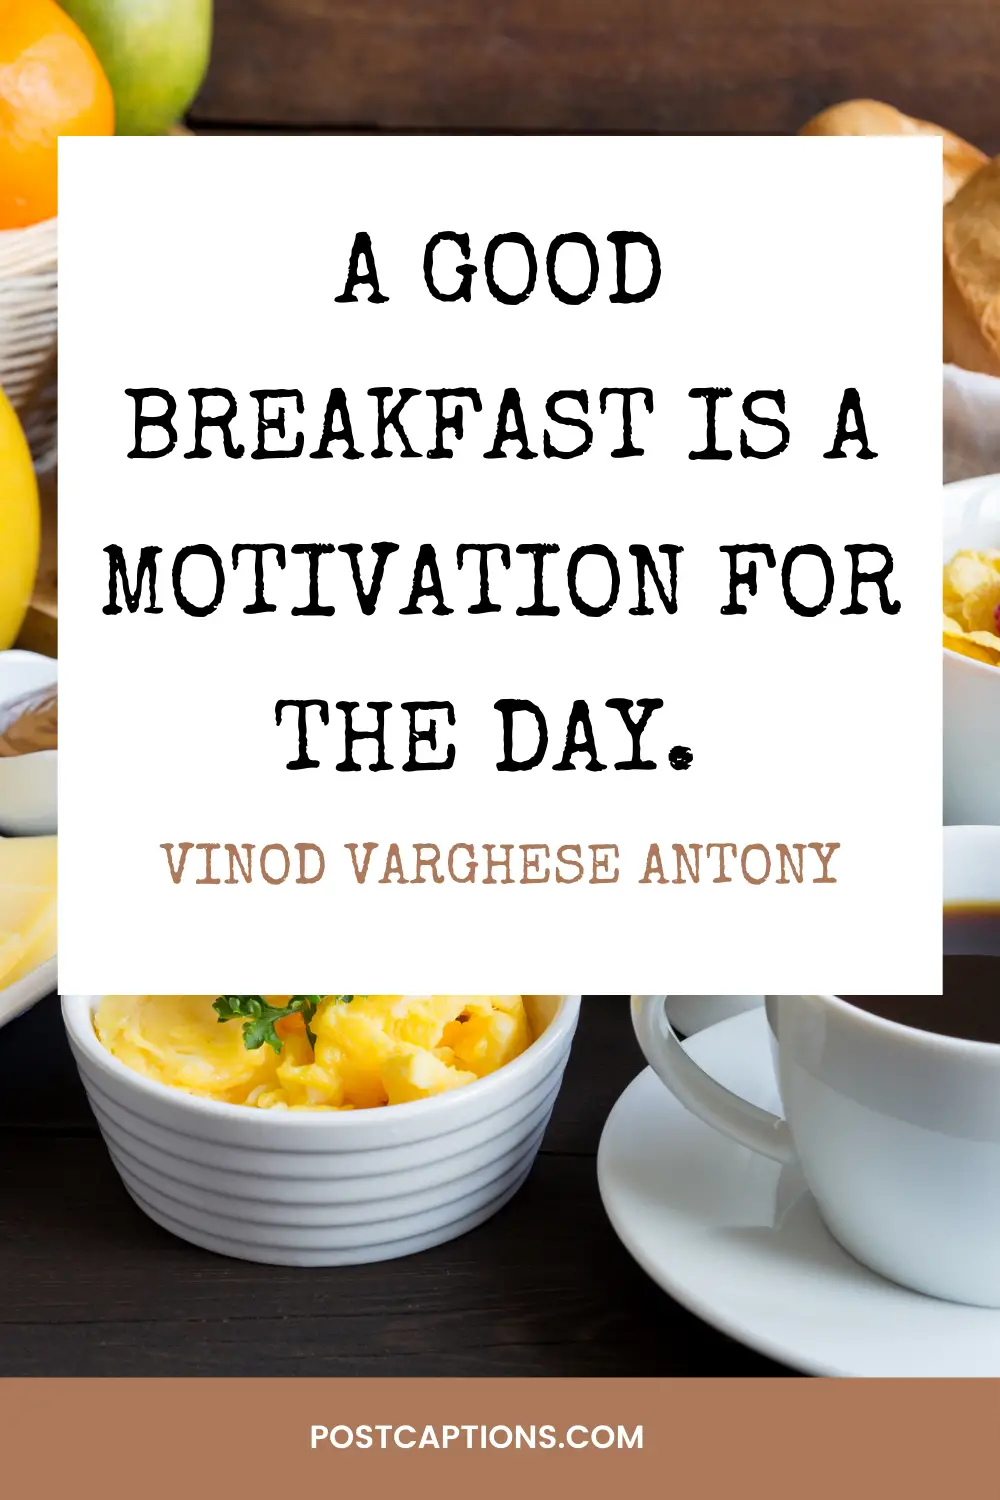 Healthy Breakfast Quotes To Improve Your Lifestyle